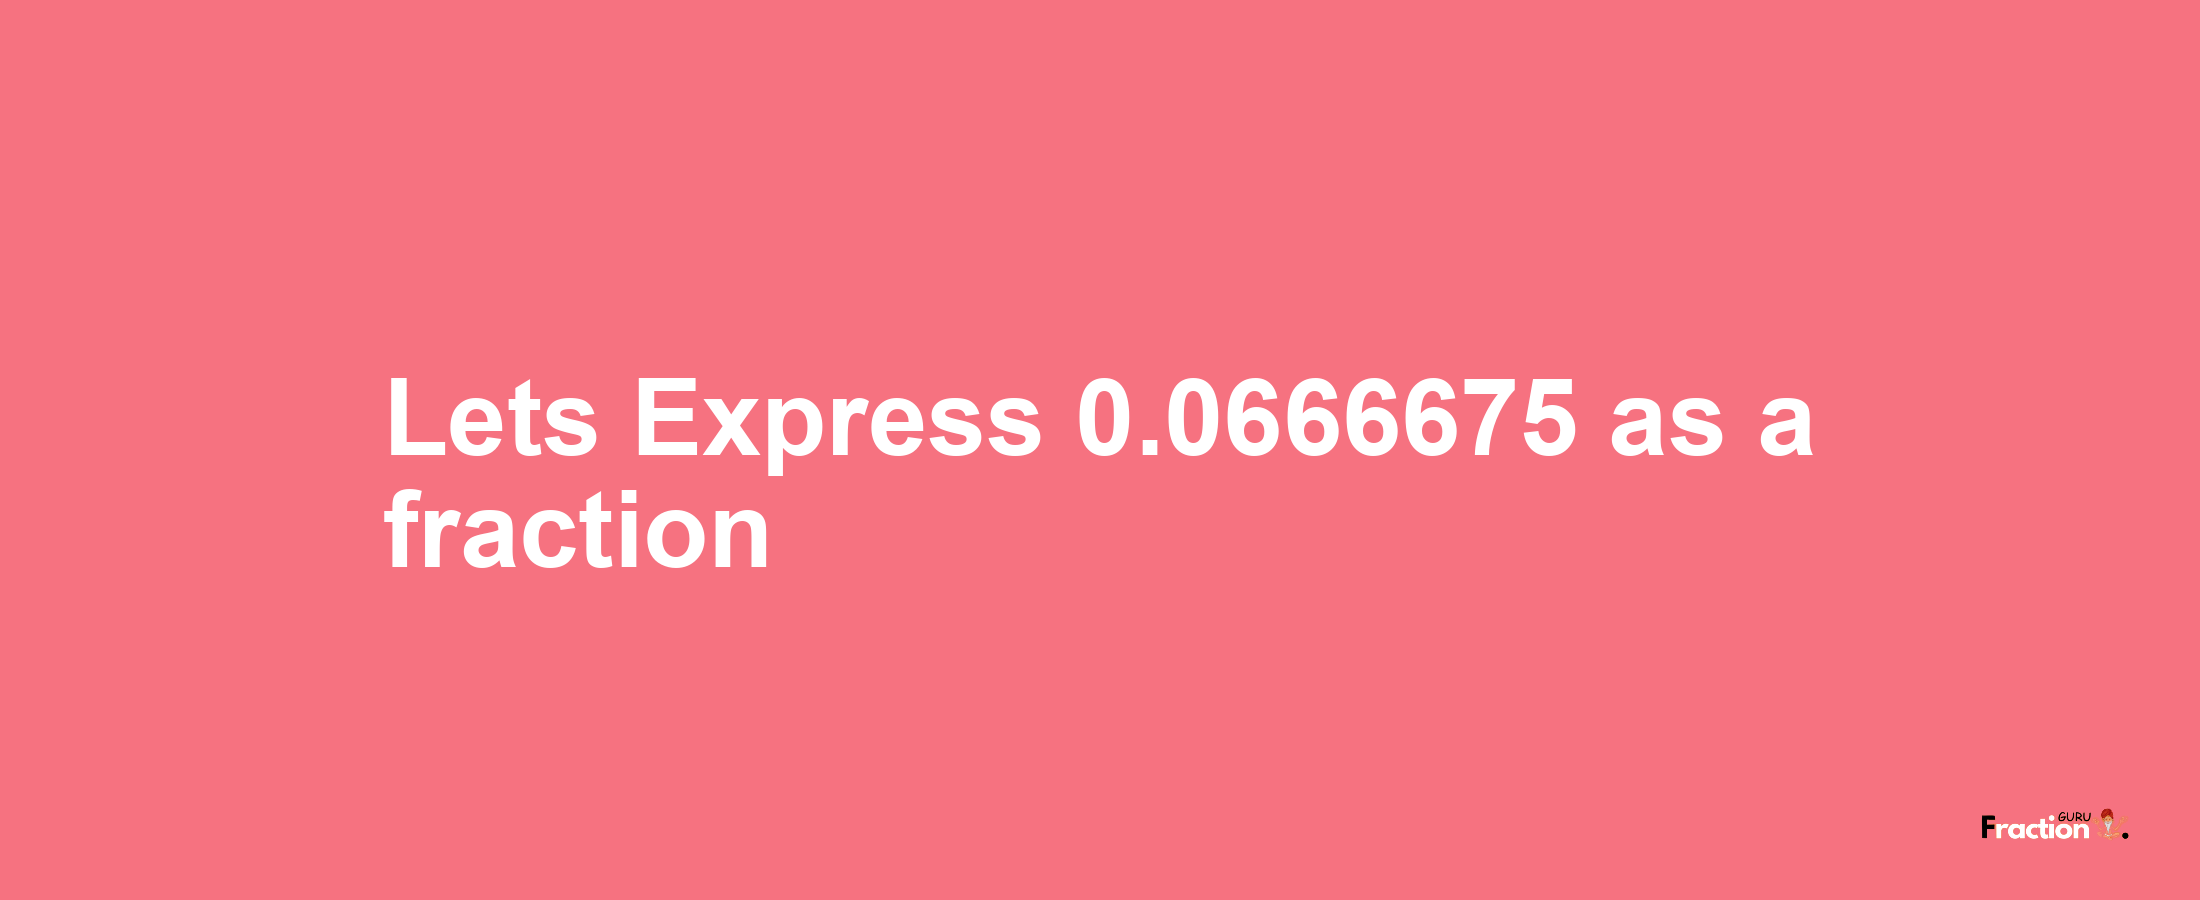 Lets Express 0.0666675 as afraction